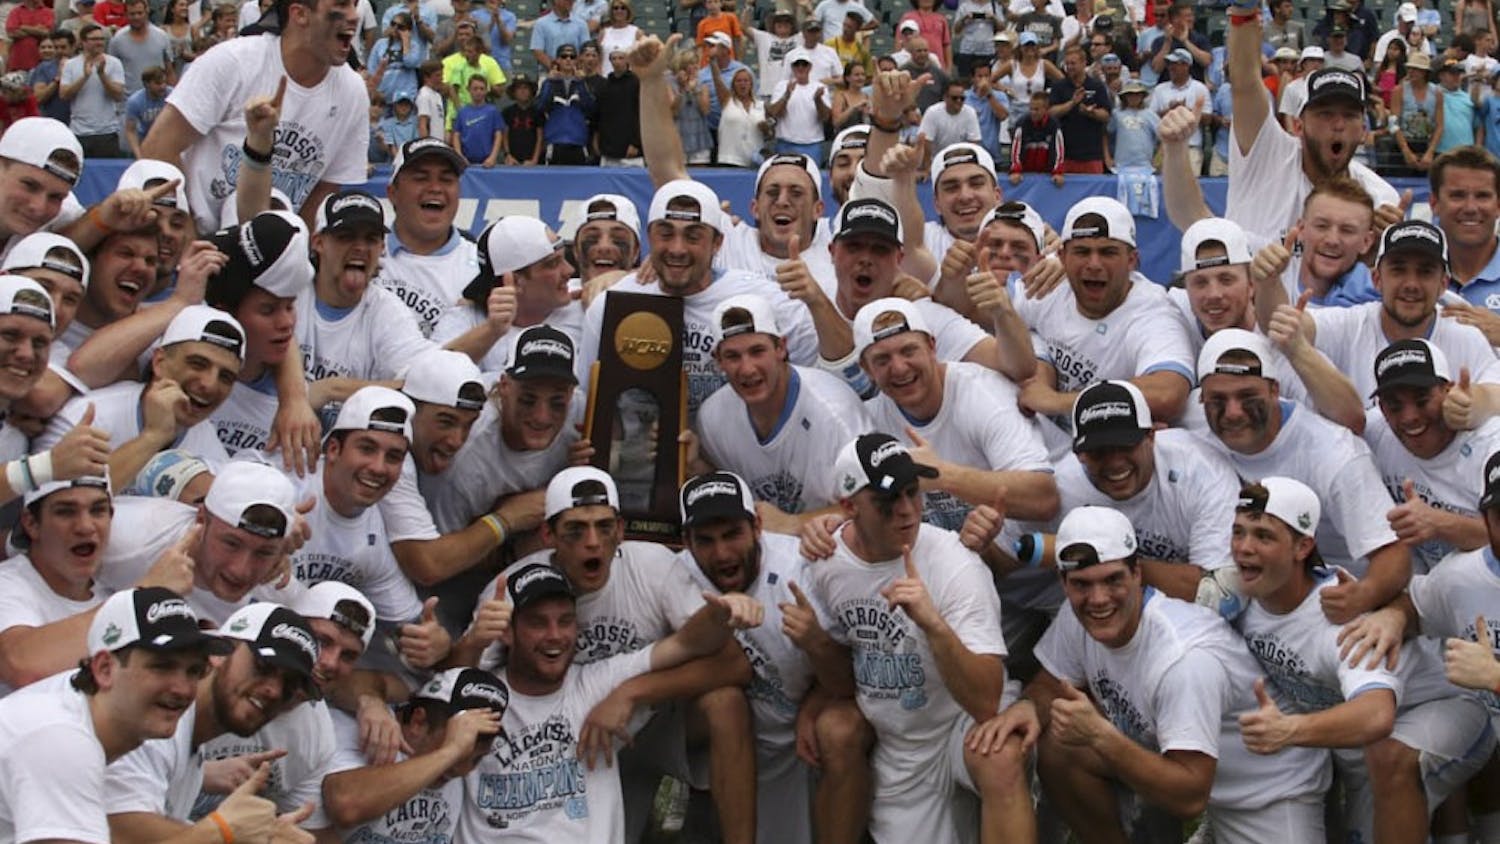 The unseeded North Carolina men's lacrosse team celebrates&nbsp;its defeat of No. 1 Maryland 14-13 in overtime to claim the program's first national championship since 1993 on May 30, 2016 at Lincoln Financial Field in Philadelphia.